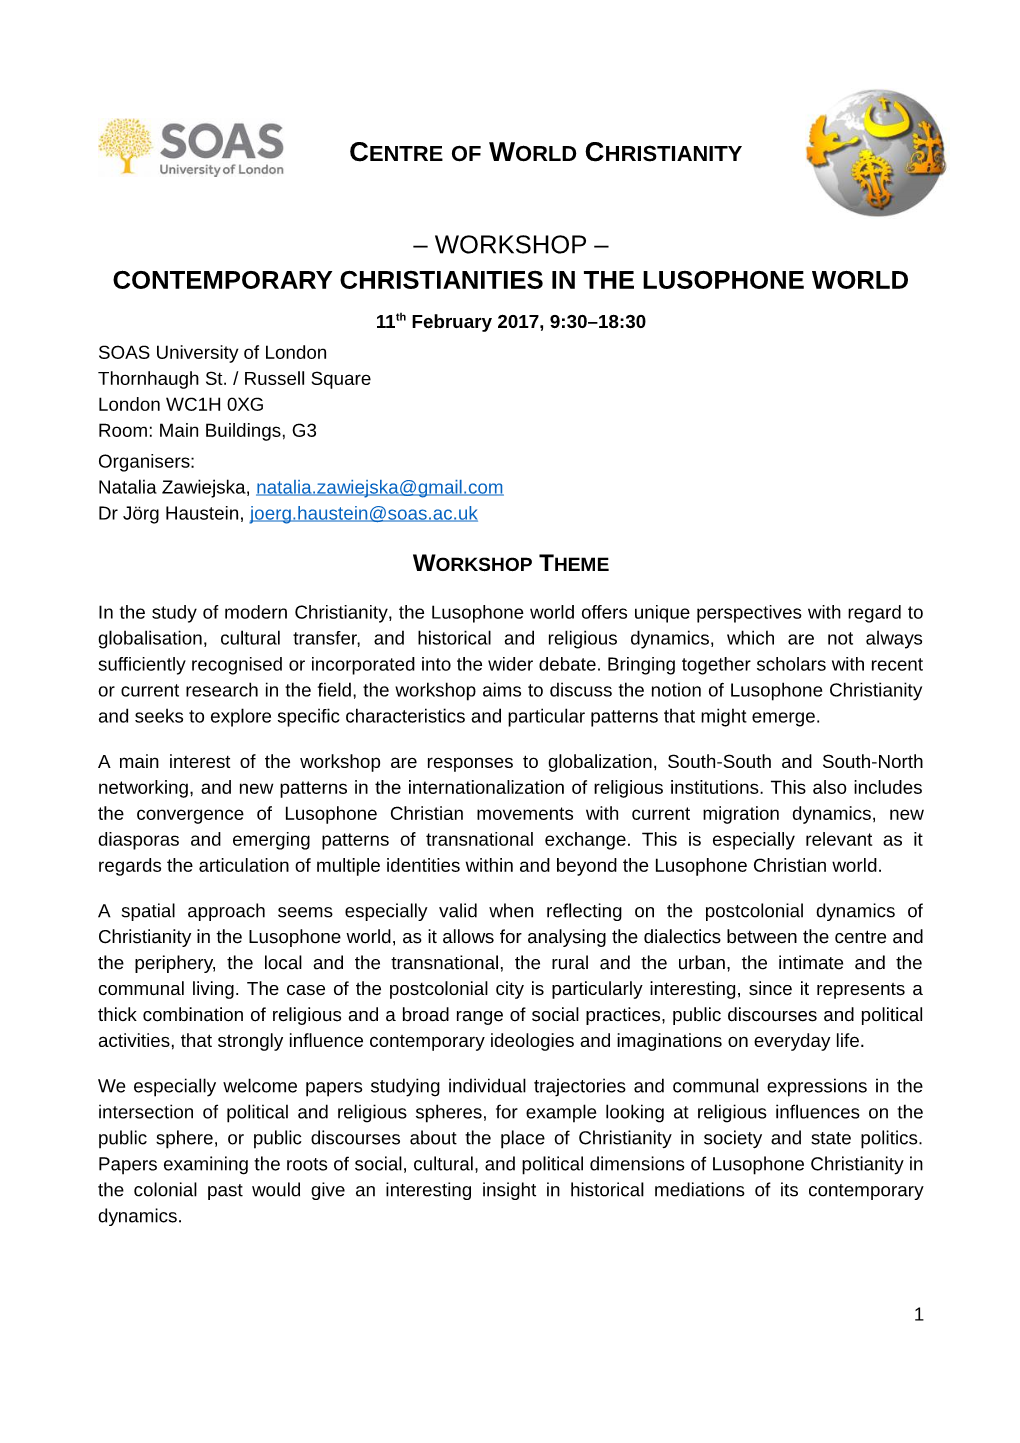 Workshop – Contemporary Christianities in the Lusophone World